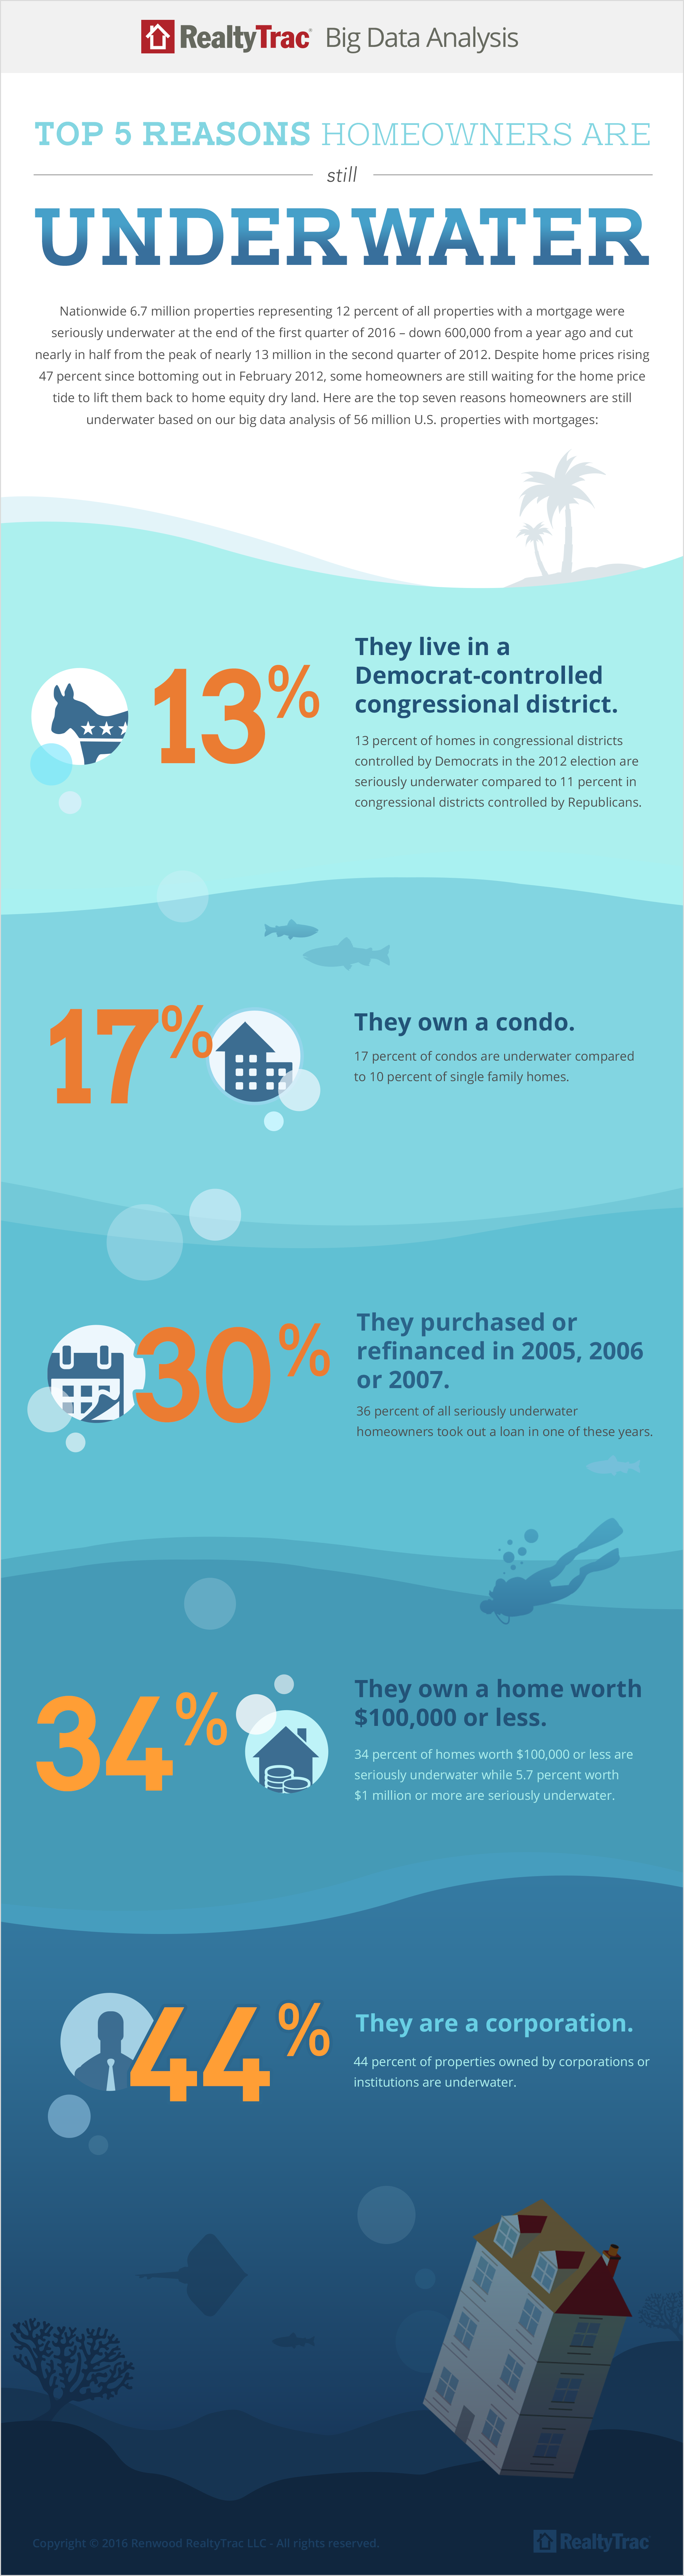 Updated RealtyTrac underwater infographic